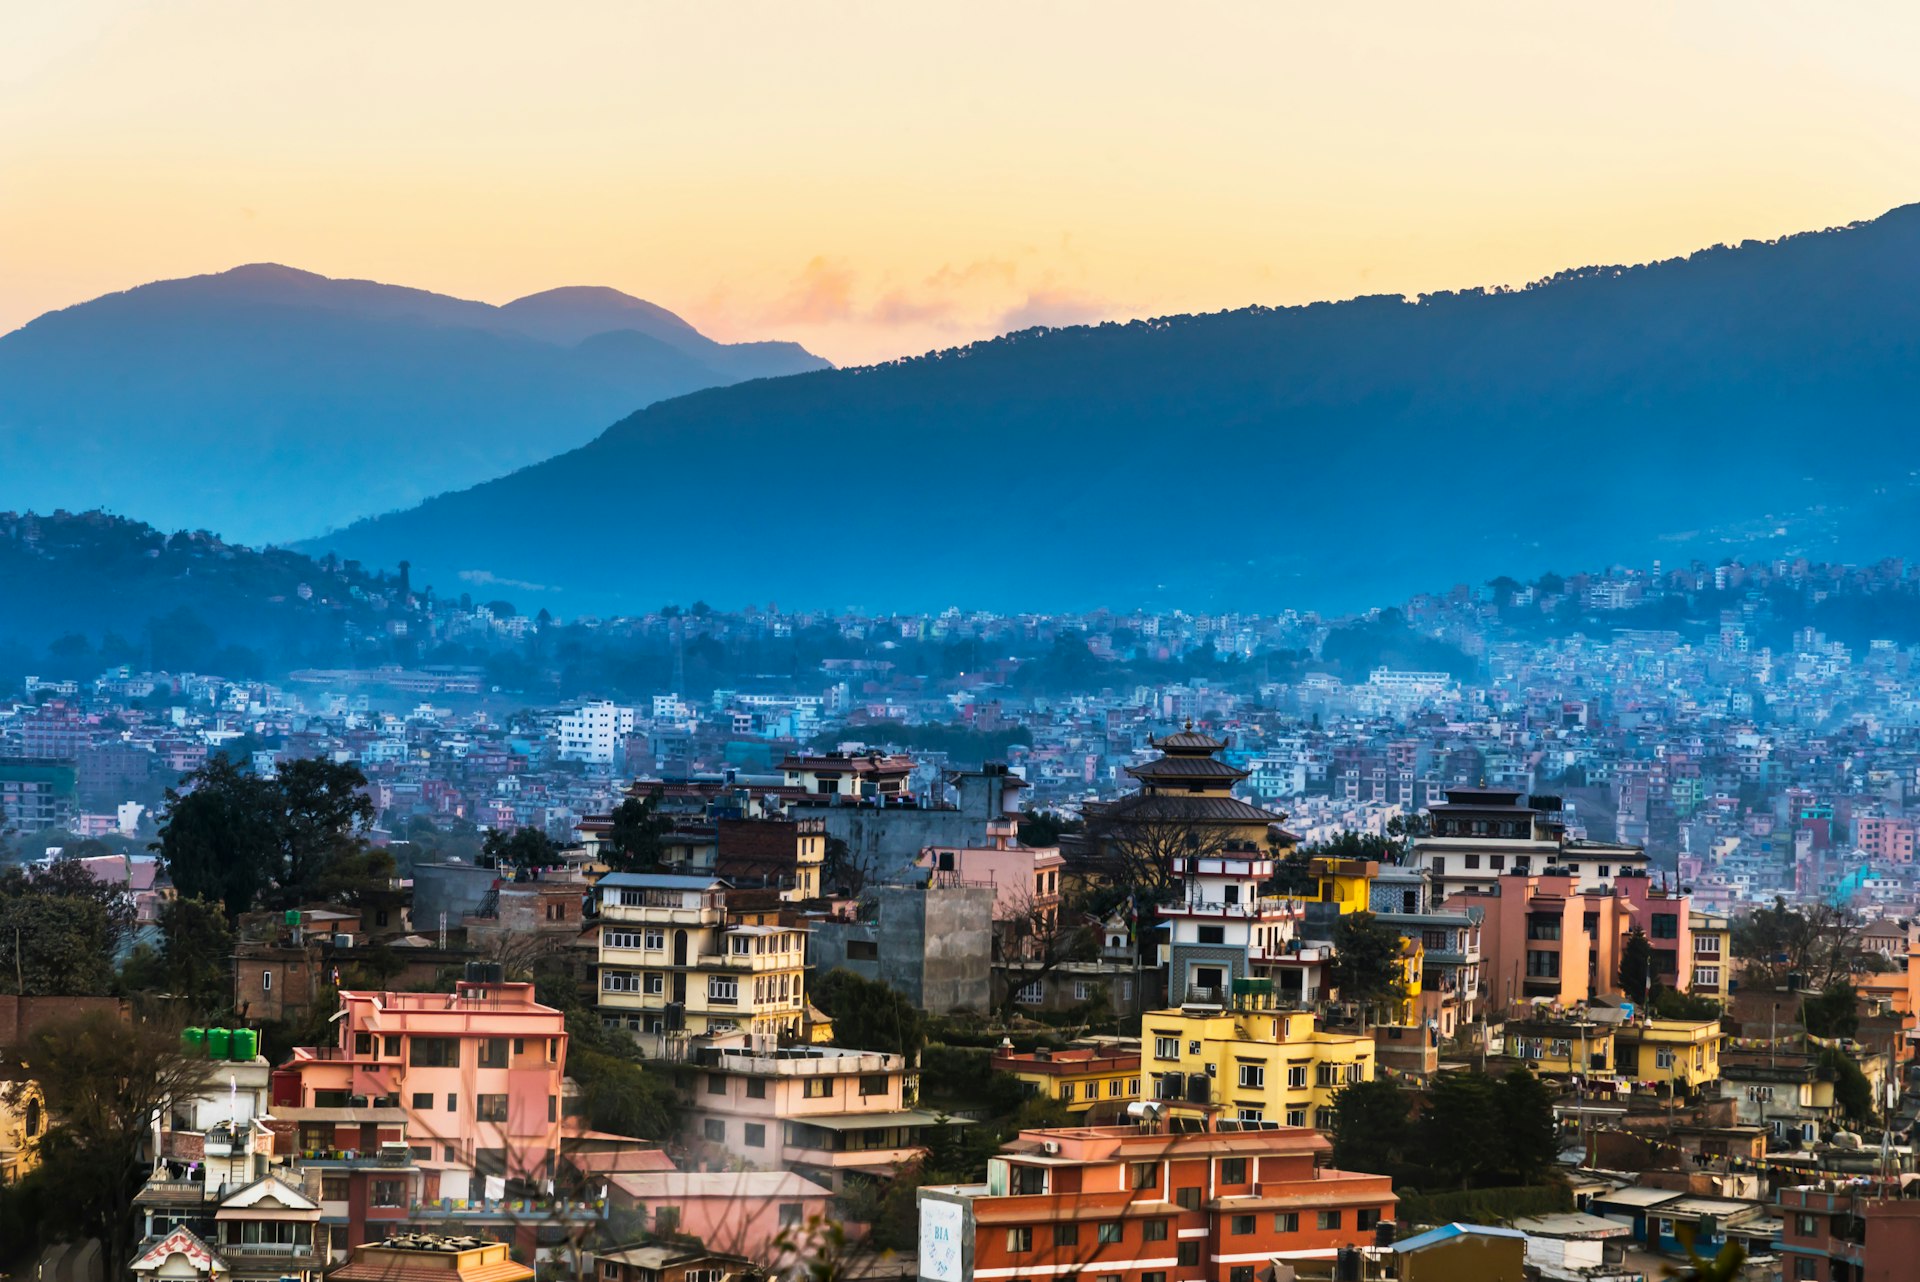 The Kathmandu city skyline. The Himalyan mountains are visible in the background